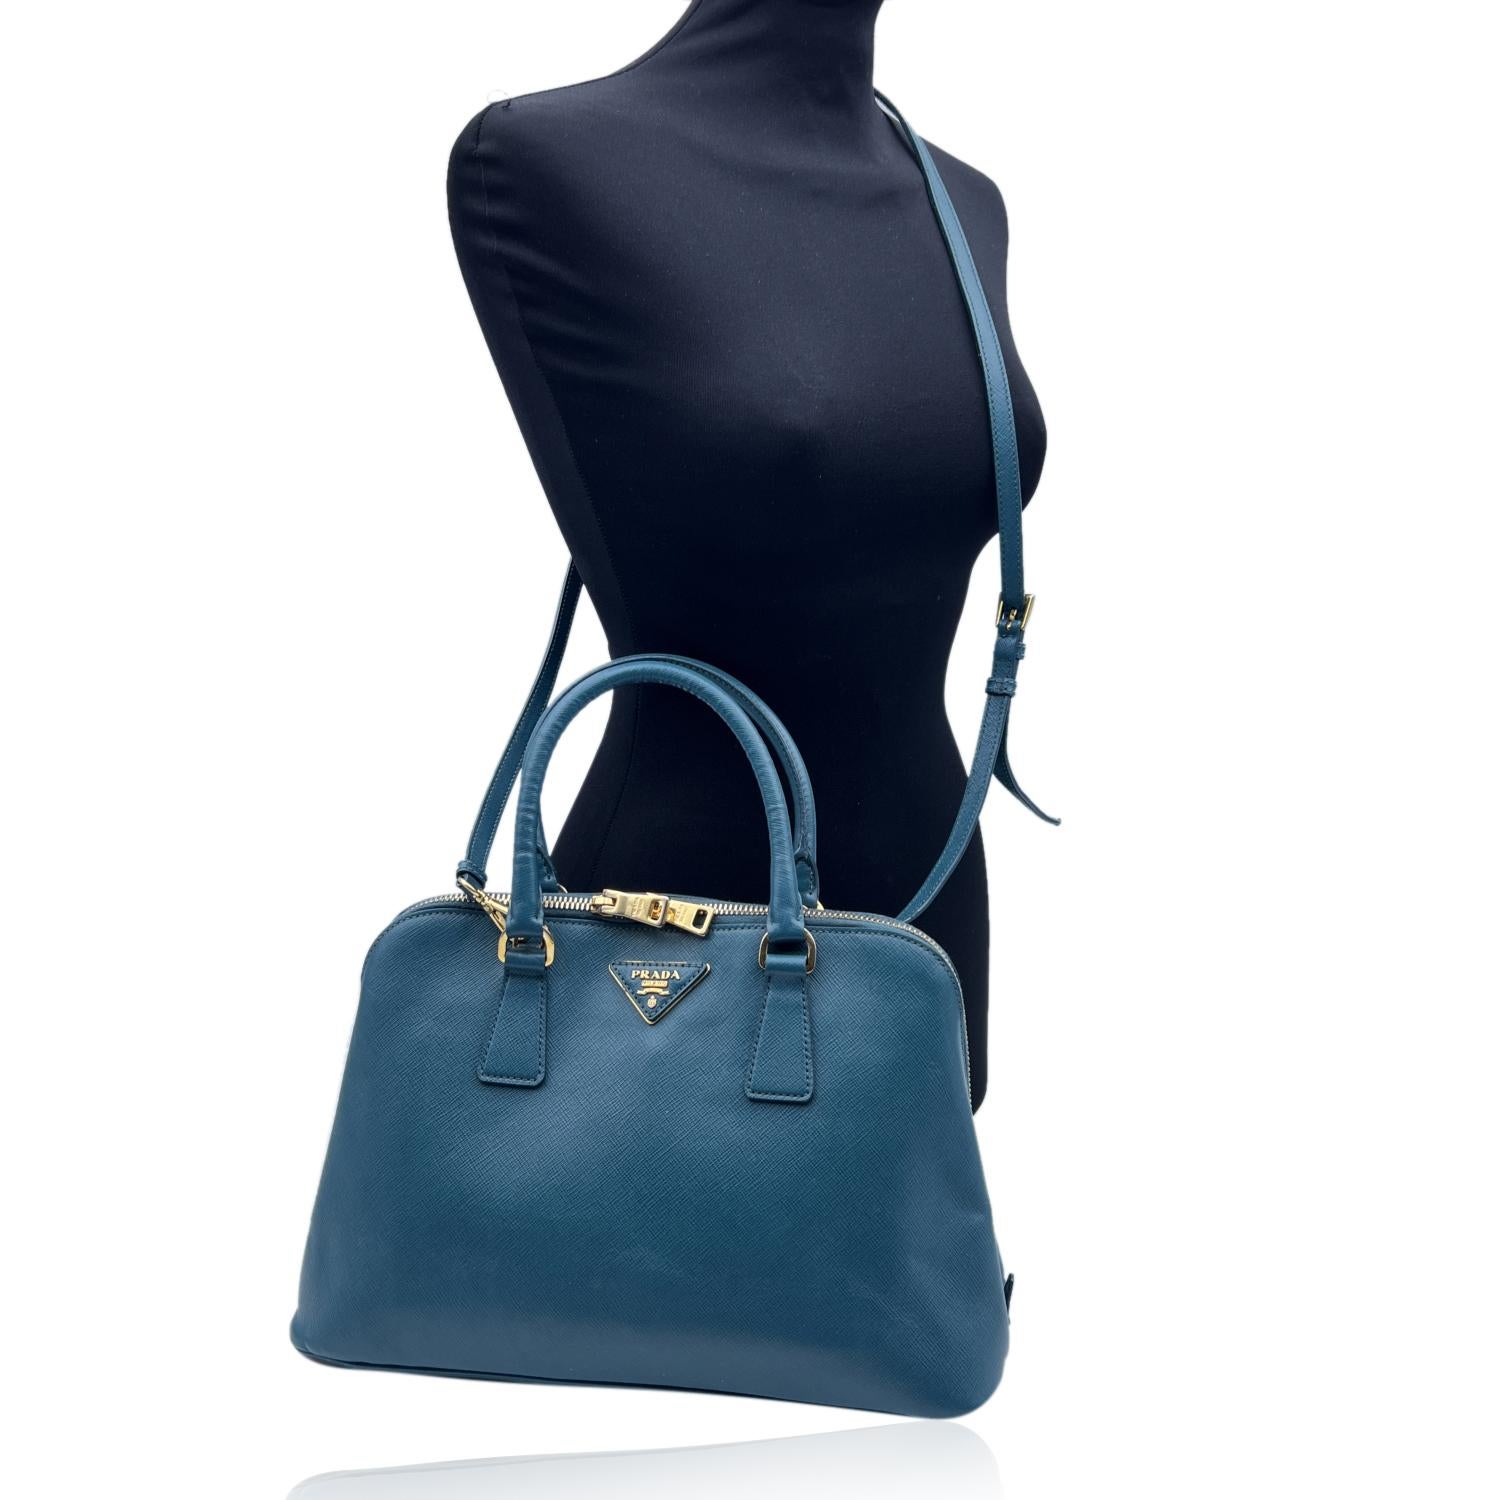 Stunning PRADA top handles bag/handbag mod. 'Promenade', designed in teal Saffiano leather and finished with leather triangle logo on the front. . It features double round top handles and a removable and adjustable shoulder strap . Upper zipper